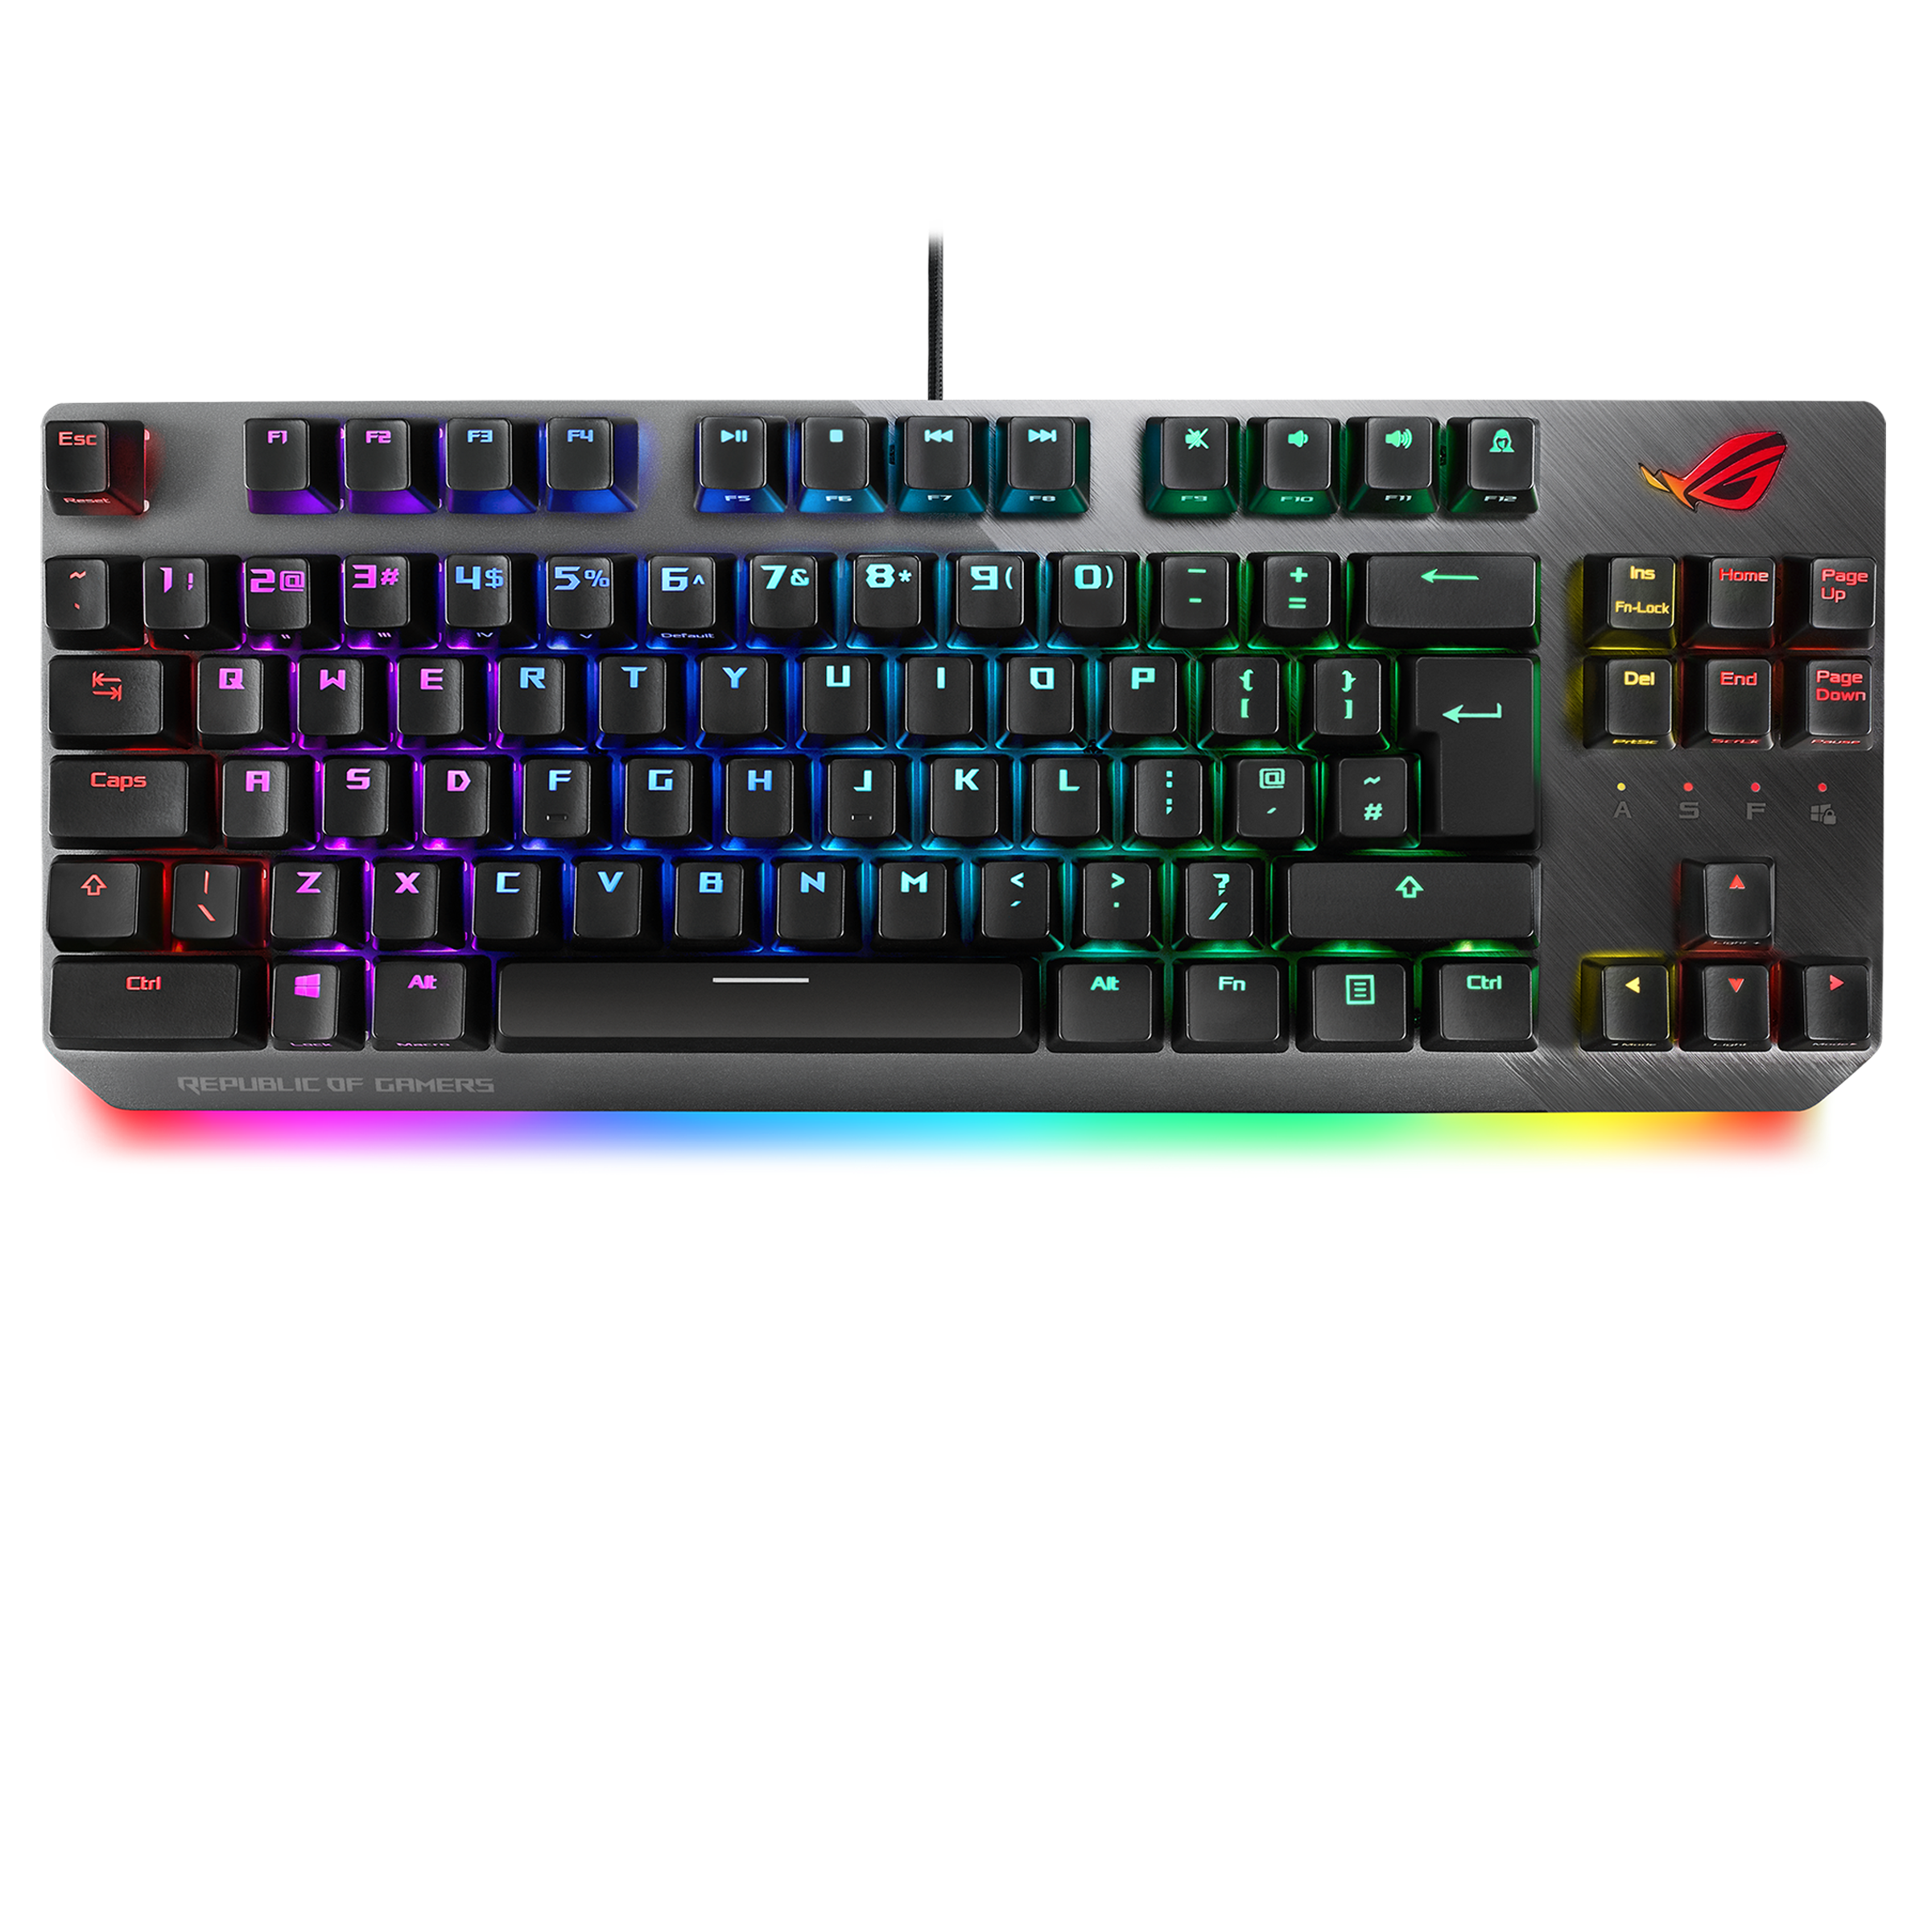 ASUS ROG Strix Scope RX Gaming Mechanical Keyboard, Red Optical Switches,  USB 2.0 Passthrough, 2X Wider Ctrl Key, Aura Sync, Armoury Crate RGB